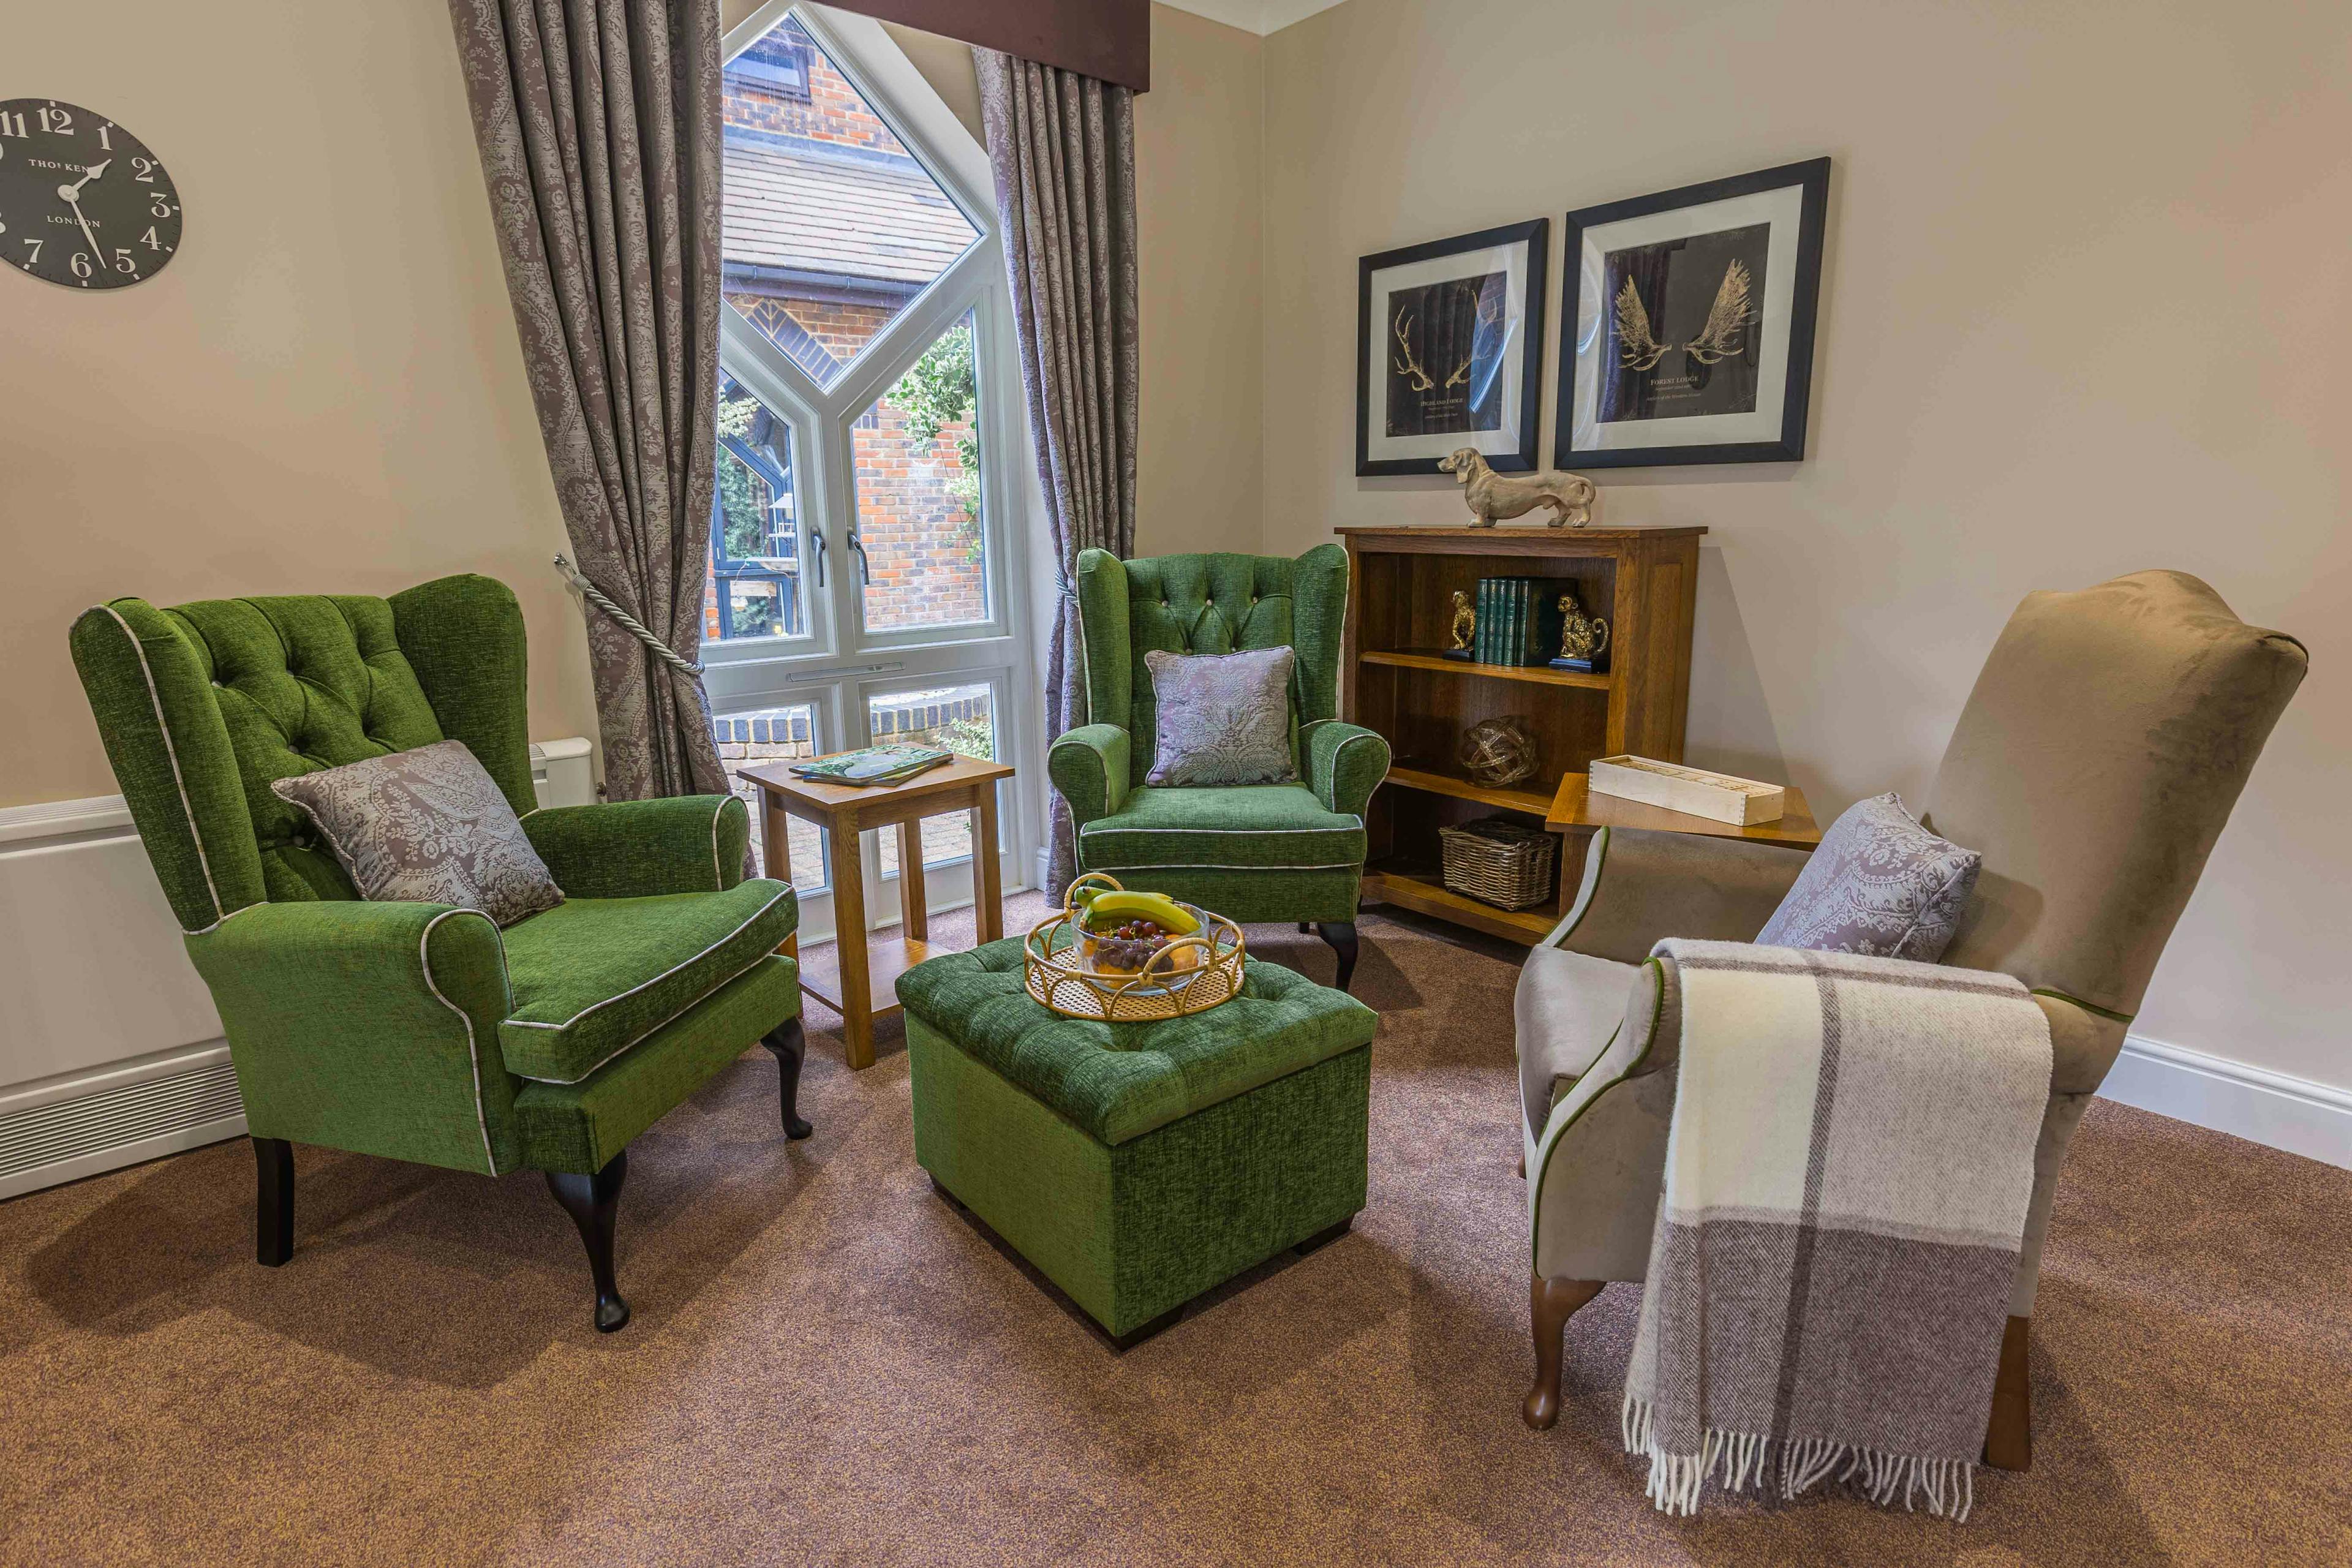 Communal Area at Sutton Valence Care Home in Maidstone, Kent